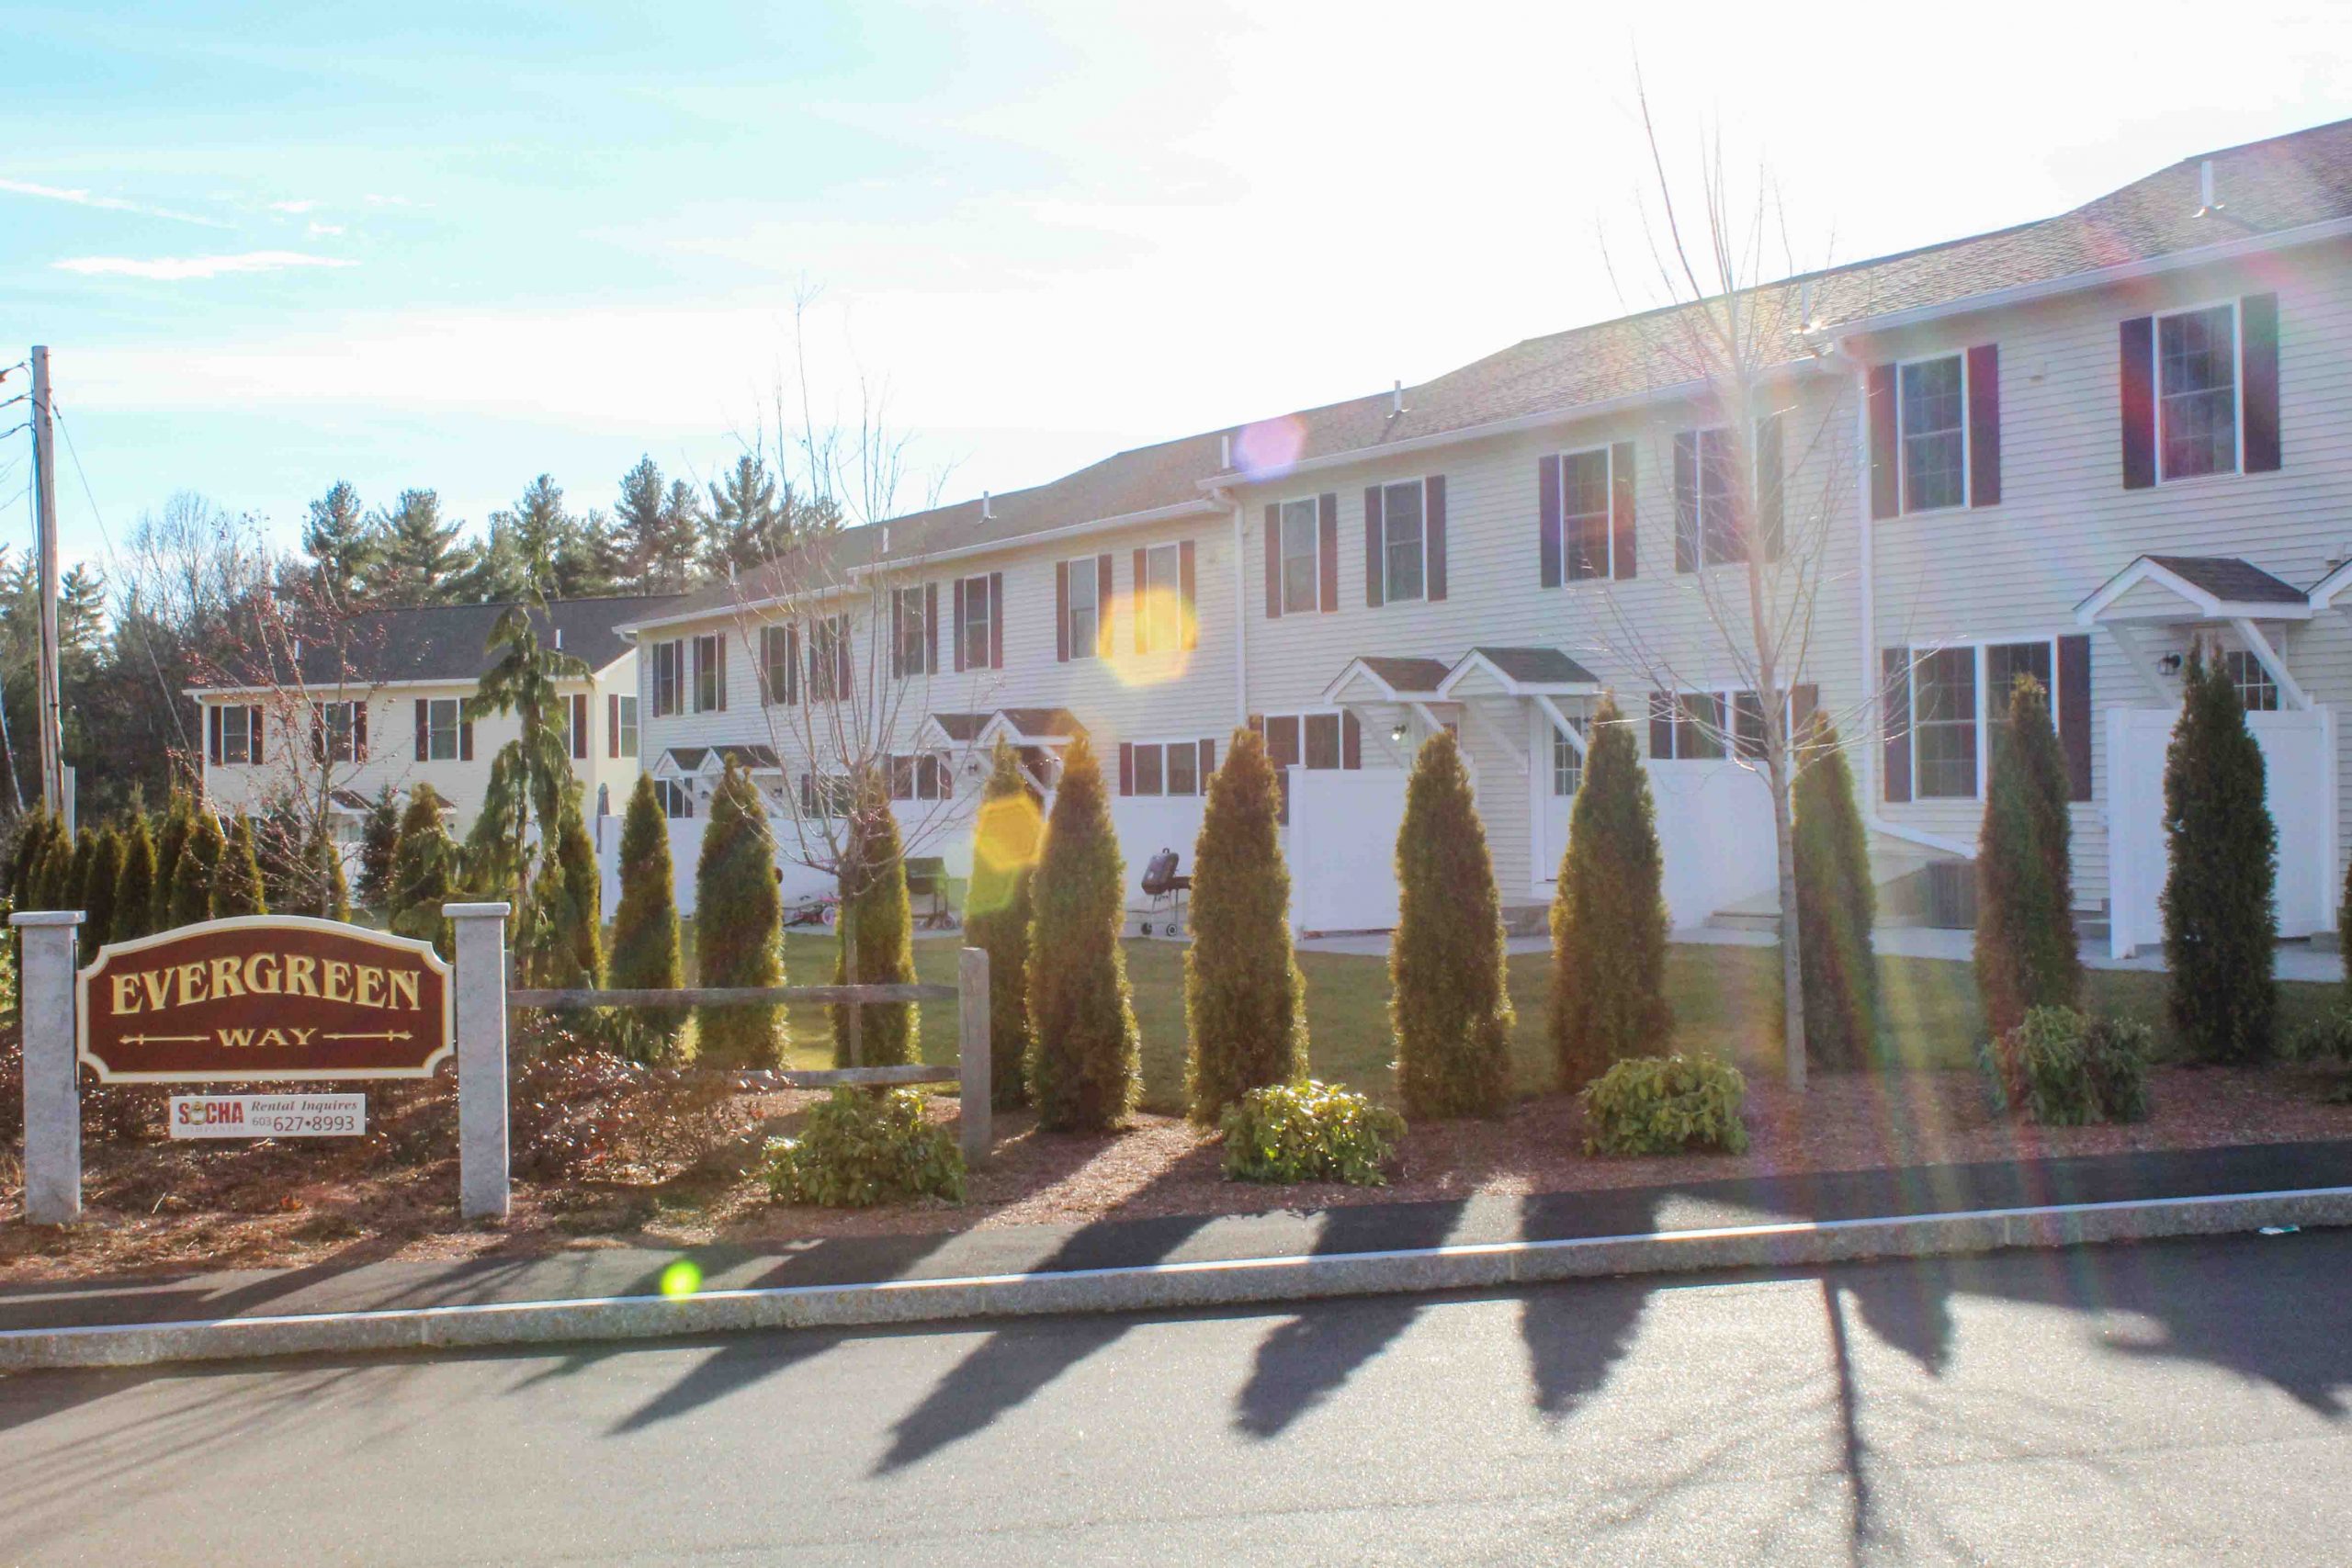 Evergreen Way community entrance by Socha Companies is a quality townhouse community in Manchester, NH